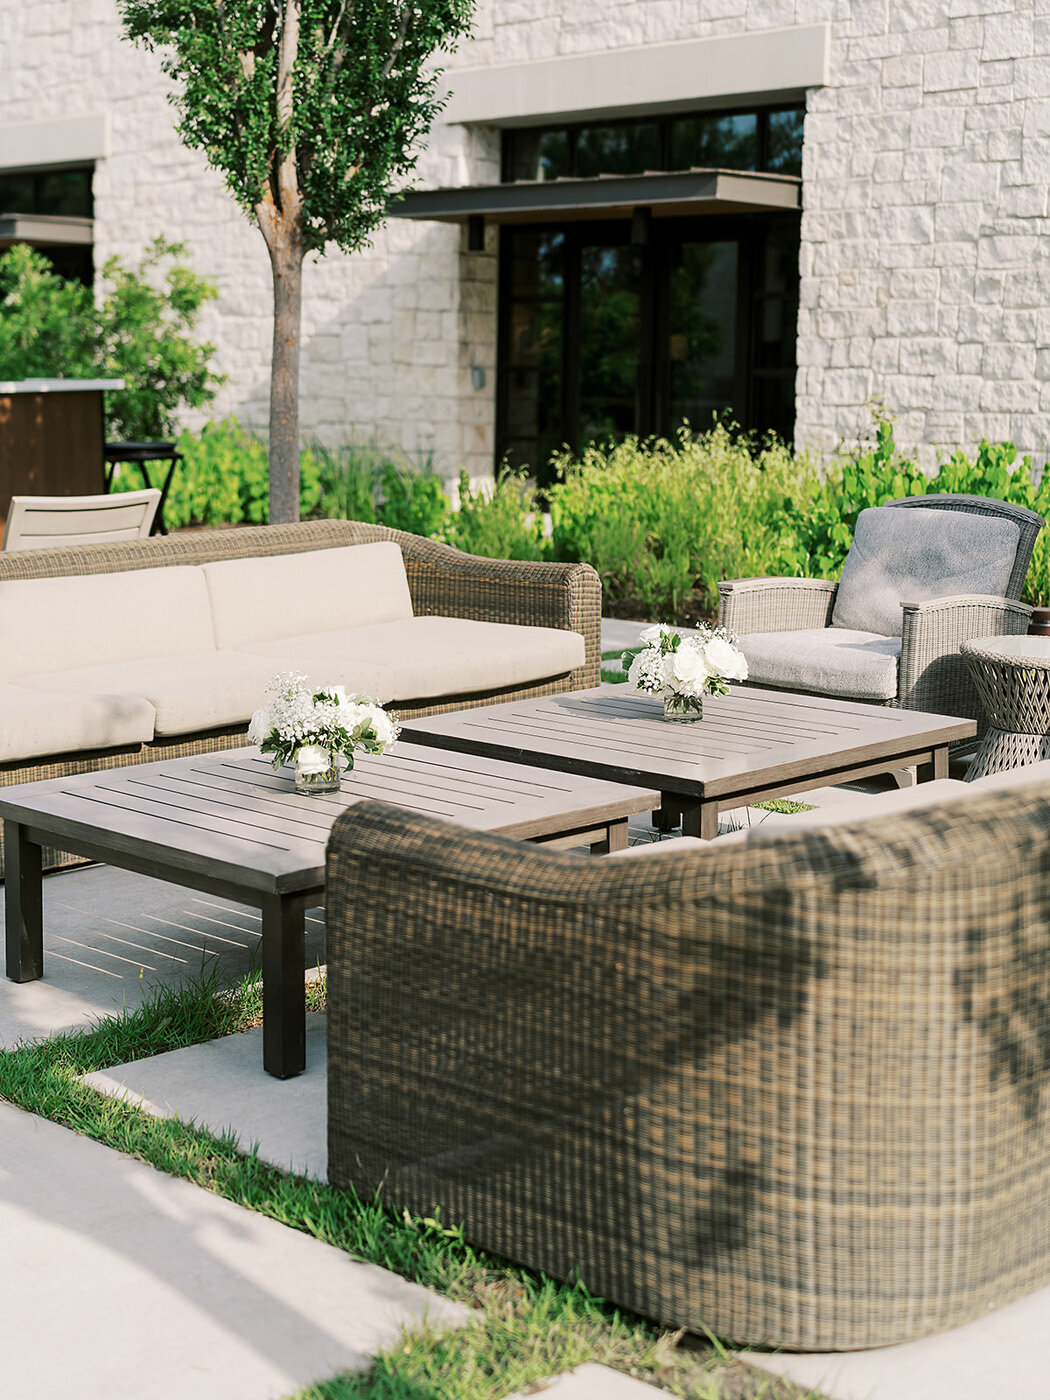 The outdoor lounge furniture for cocktail hour at Omni Barton Creek